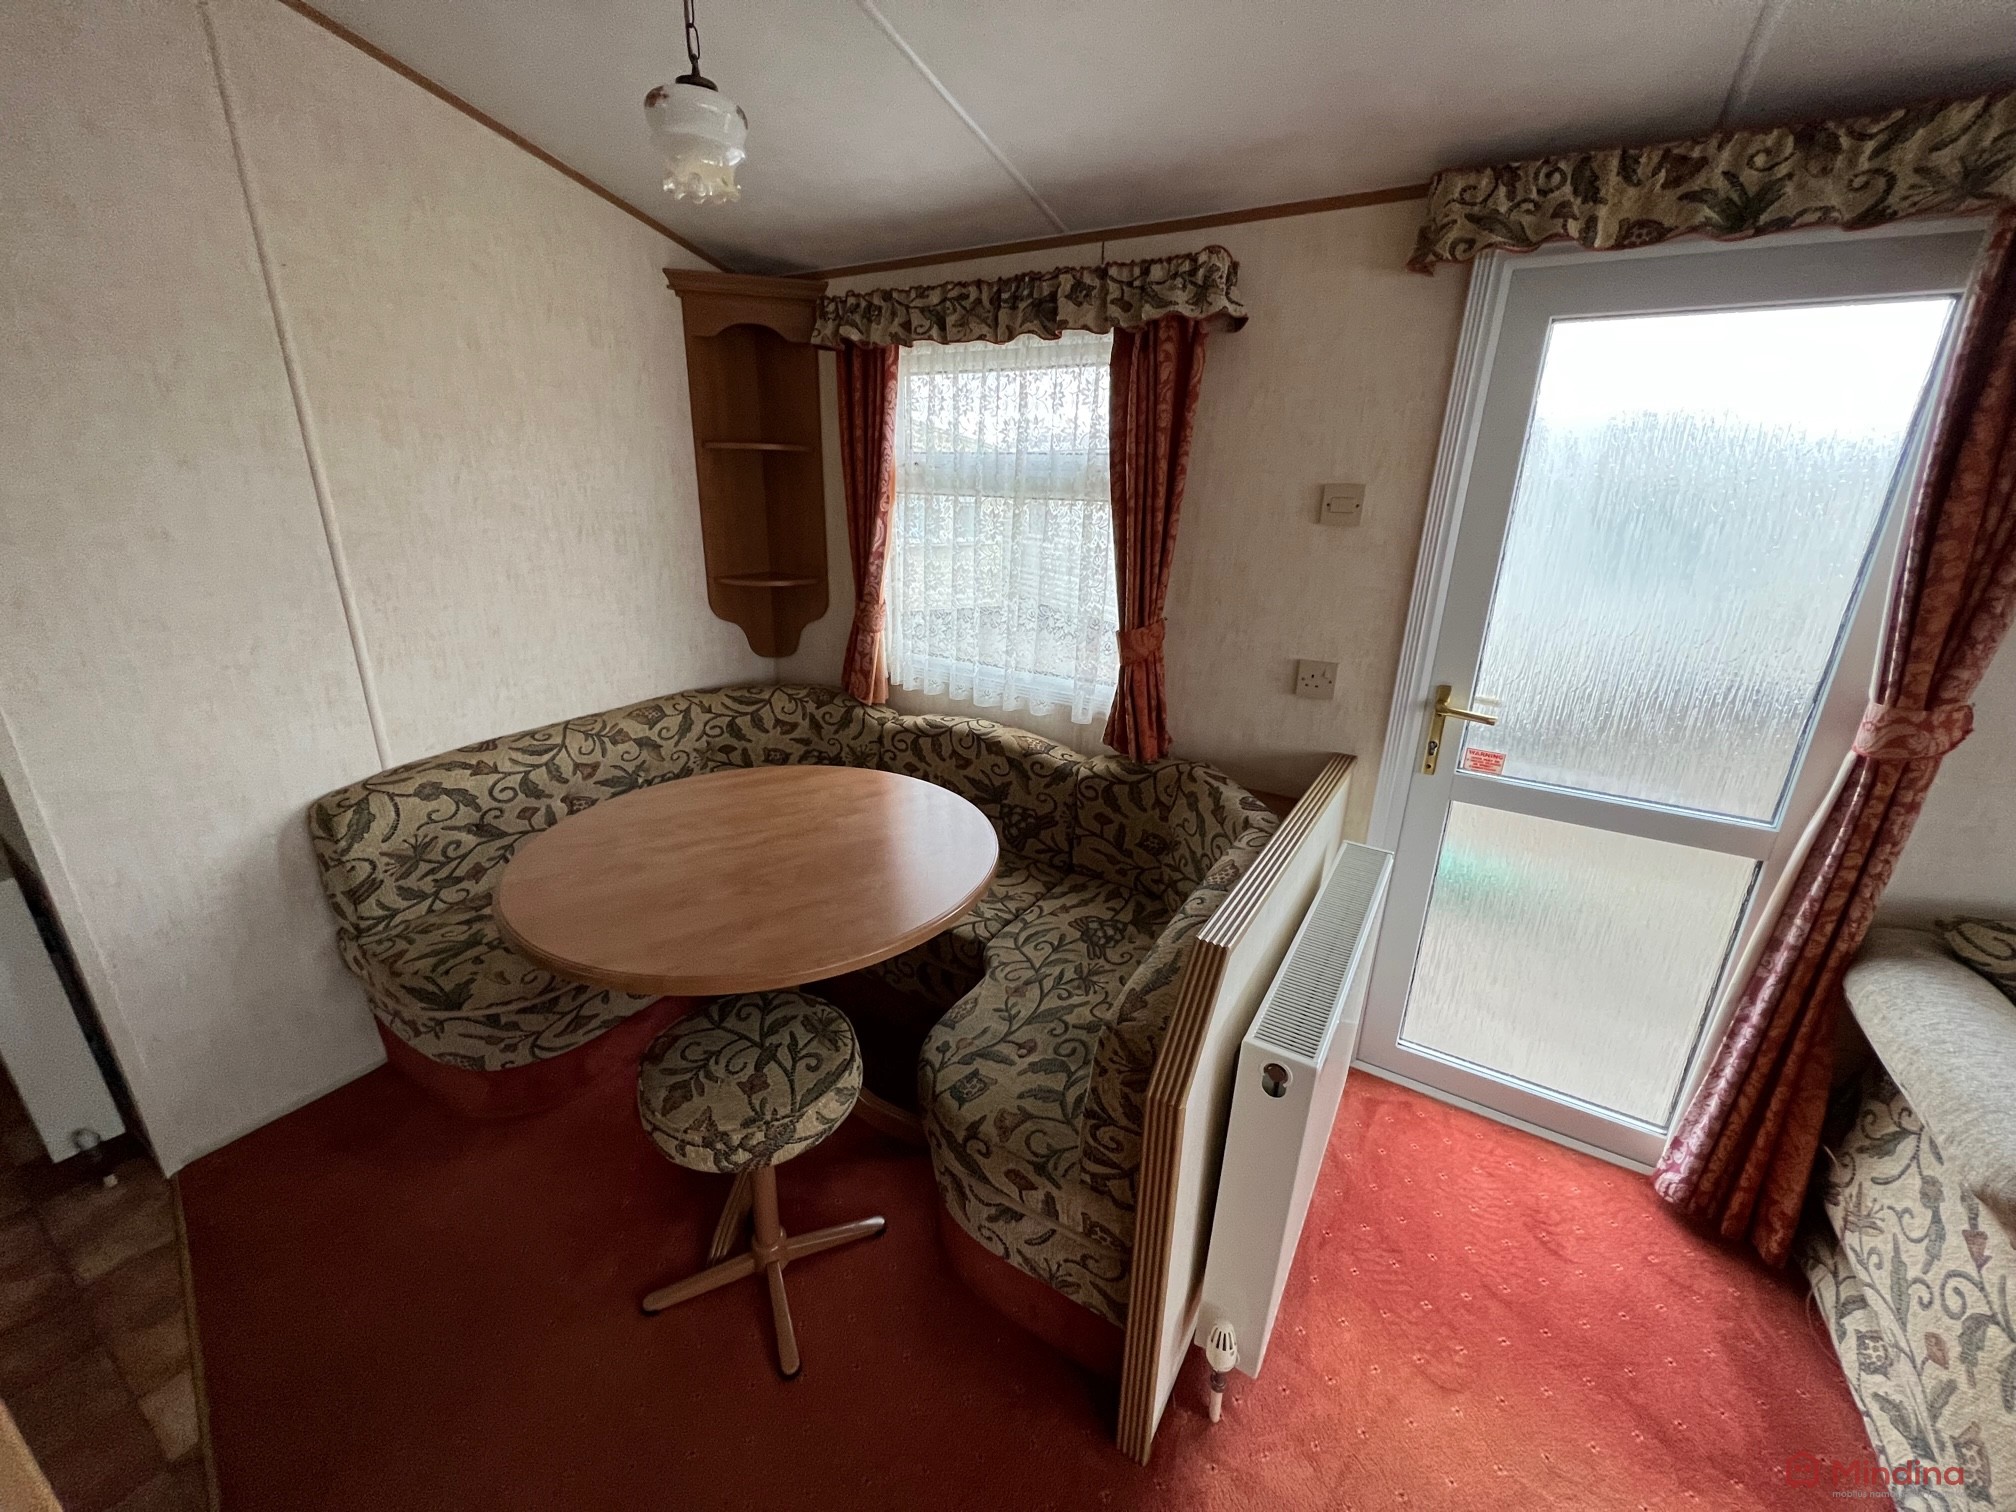 Willerby Countrystyle 3,7×11 TIK 13500EUR!!!